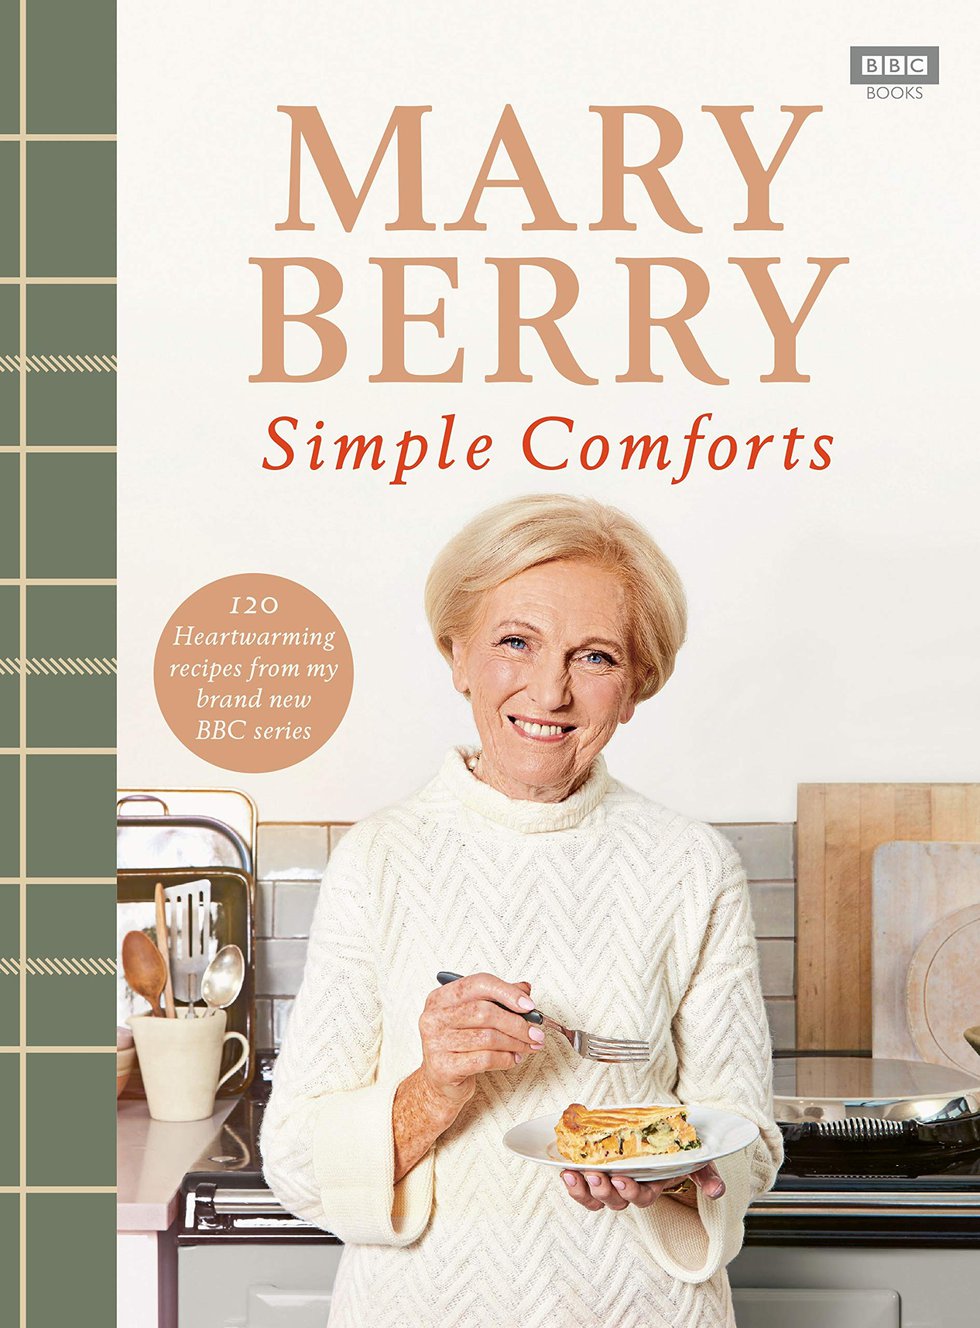 Mary Berry's Simple Comforts.jpg